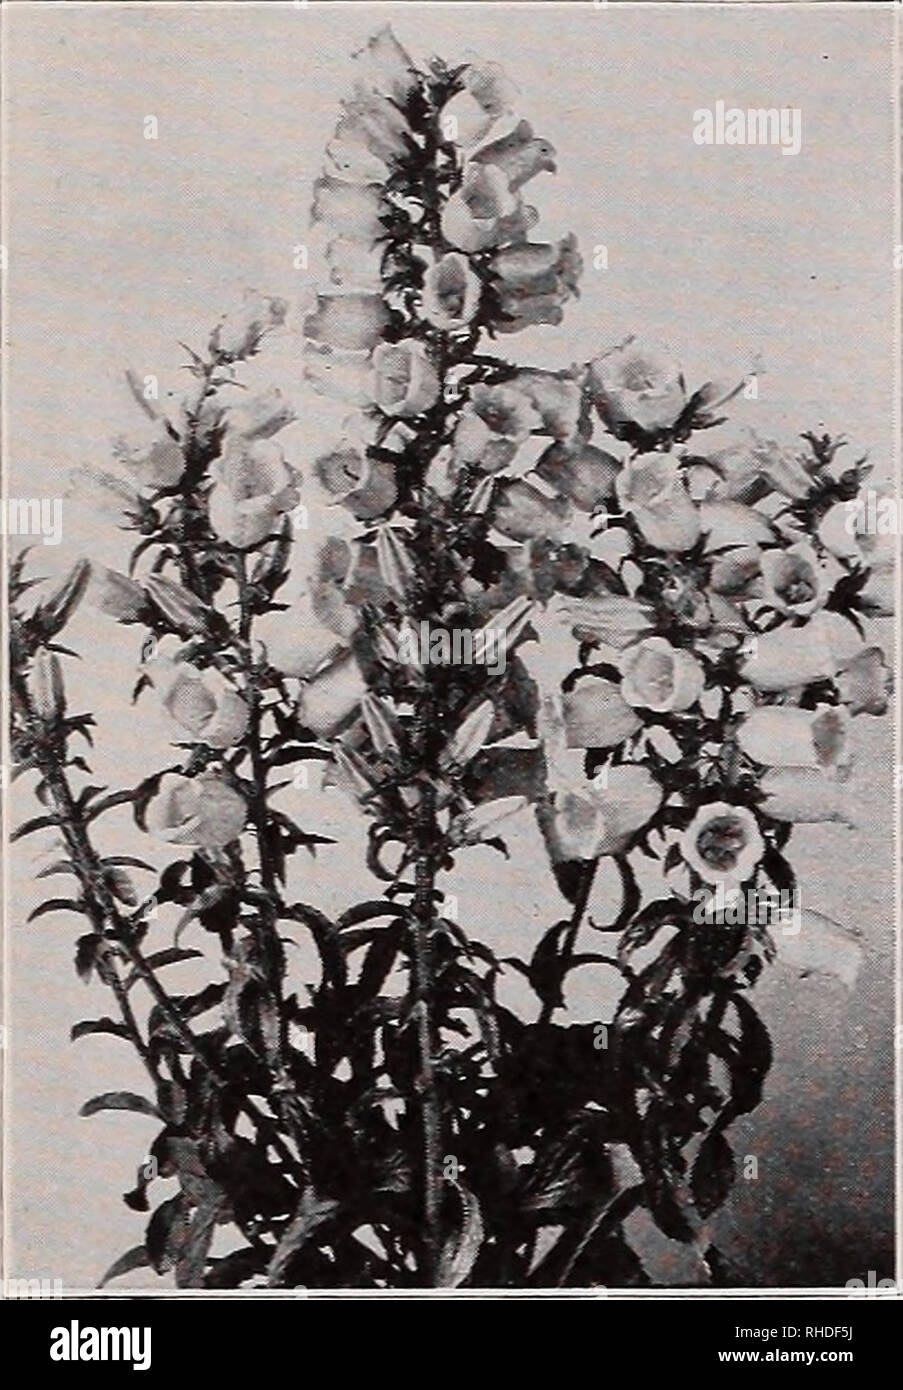 . Book for florists. Flowers Seeds Catalogs; Bulbs (Plants) Seedlings Catalogs; Vegetables Seeds Catalogs; Trees Seeds Catalogs; Horticulture Equipment and supplies Catalogs. 2 VAUGHAN'S SEED STORE, CHICAGO AND NEW YORK, BOOK FOR FLORISTS Novelties and Specialties of 1933. ANNUAL CANTERBURY BELLS COLUMNEA SPLENDENS An attractive well-known evergreen pot plant belonging to the Gesneriaceae, offered in seed the first time January sowings pro- duce fine flowering, hanging tendrils about 20 inches long in Autumn. The reddish brown opposite leaves are arranged in close rows. The predominant shade o Stock Photo